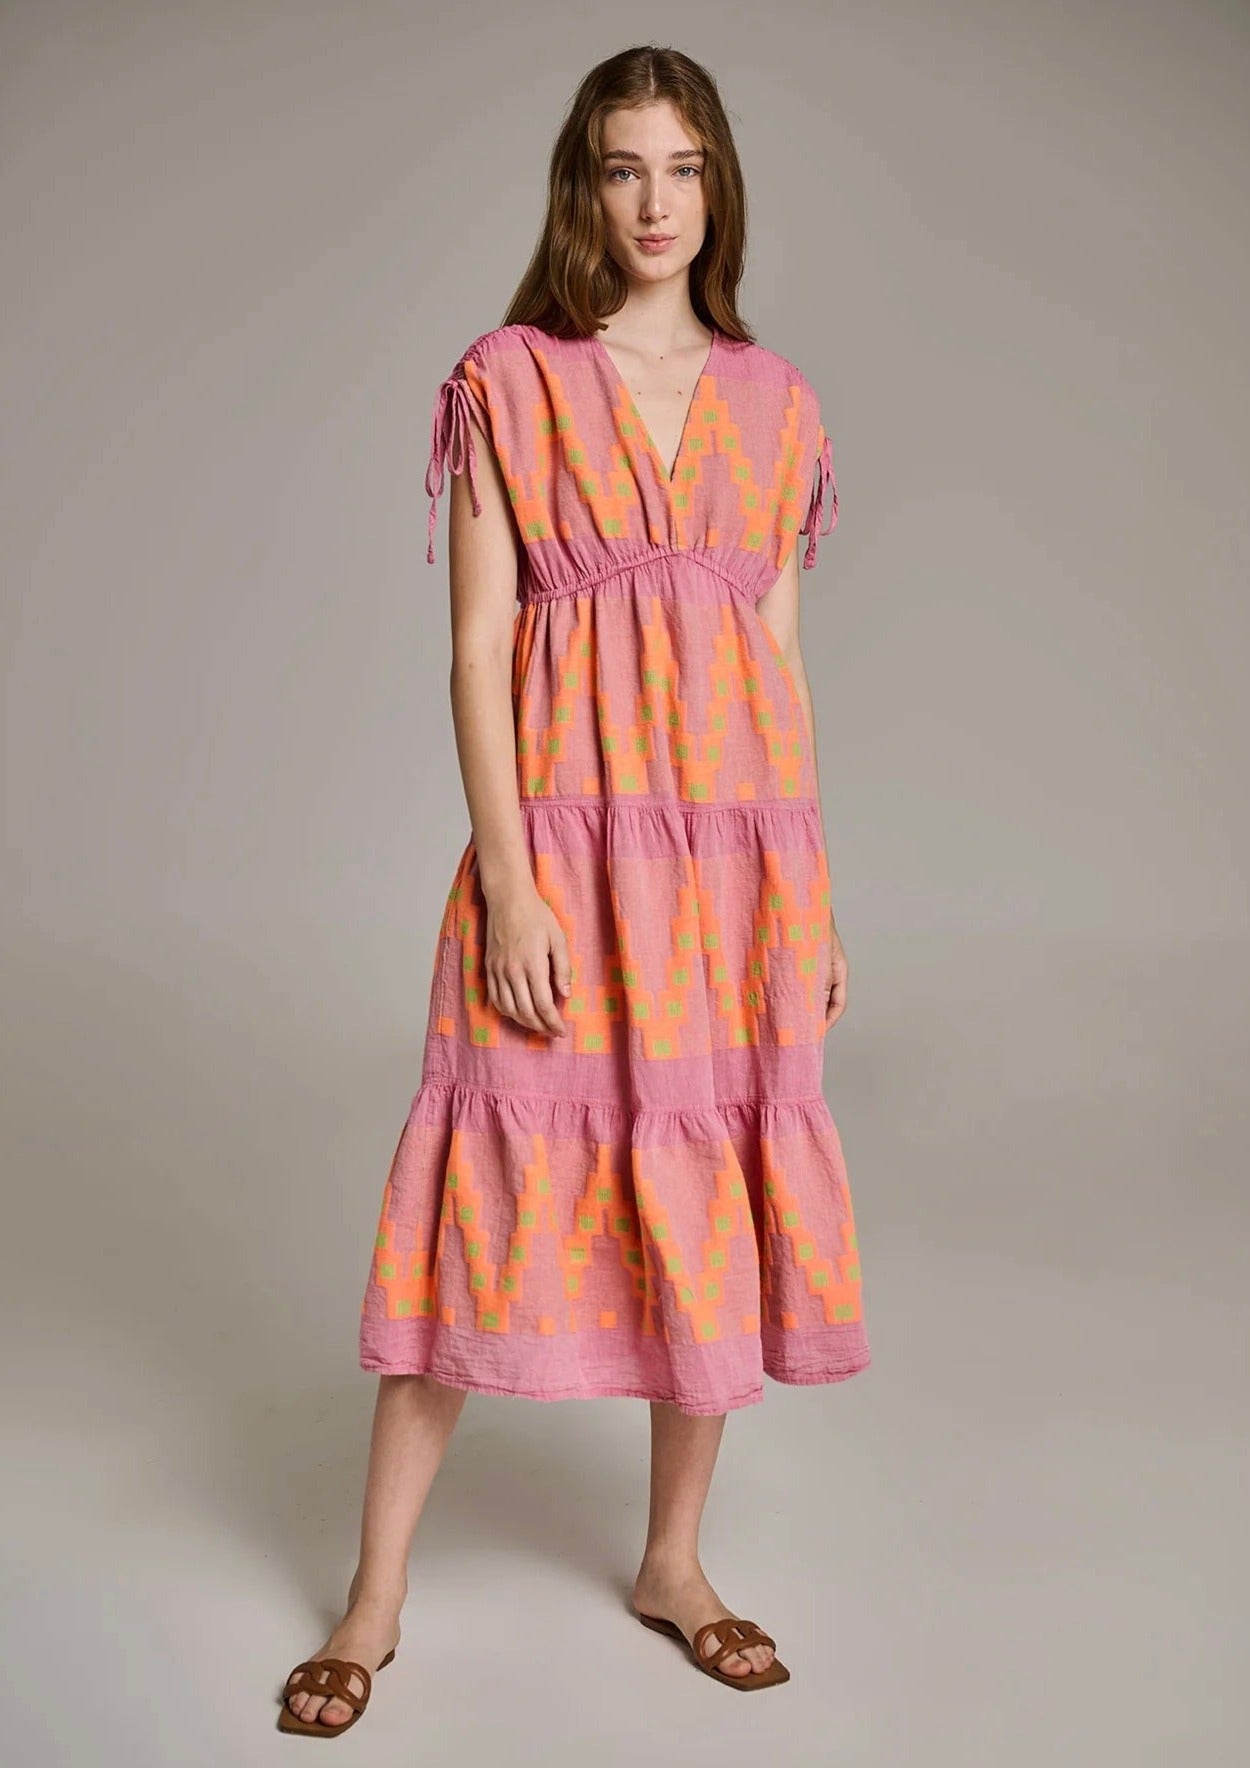 Devotion Topazio Dress - Pink/Orange The Topazio dress by brand Devotion Twins is a perfect choice for your summer getaway. This dress is crafted with great attention to detail, using a traditional loom technique that adds a touch of artistry to the garment.